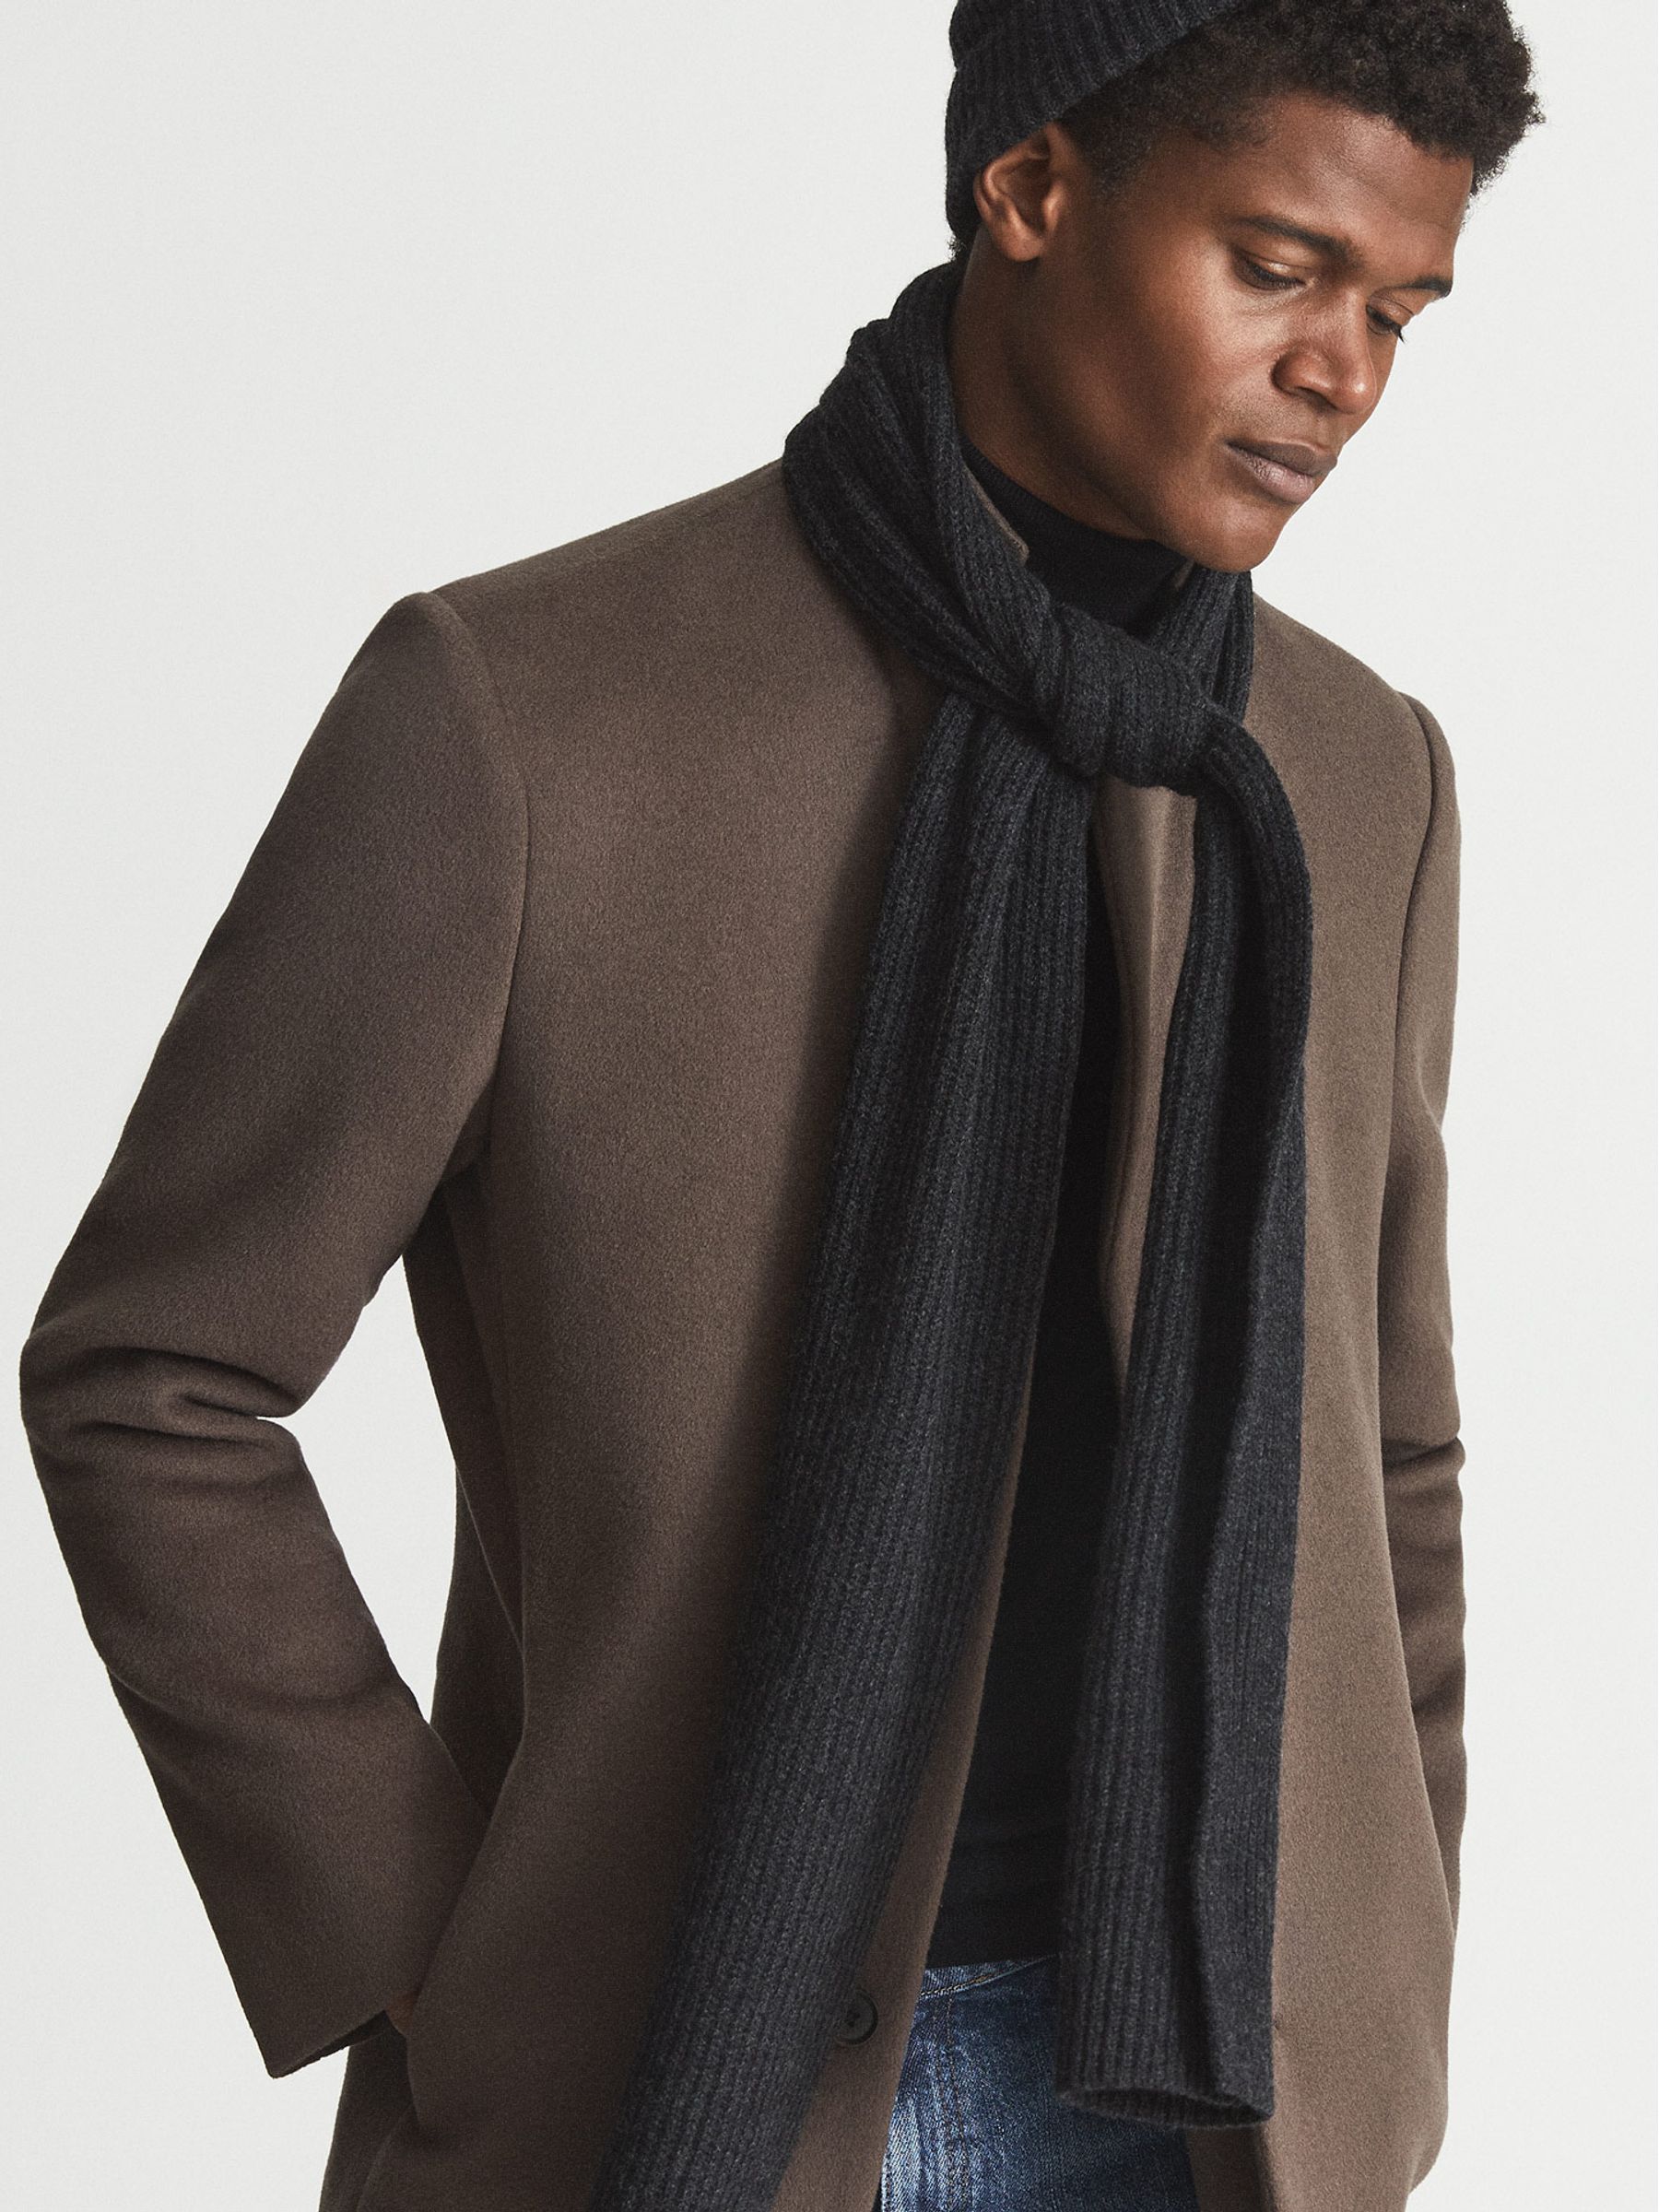 Reiss Alderney Ribbed 100% Cashmere Scarf - REISS